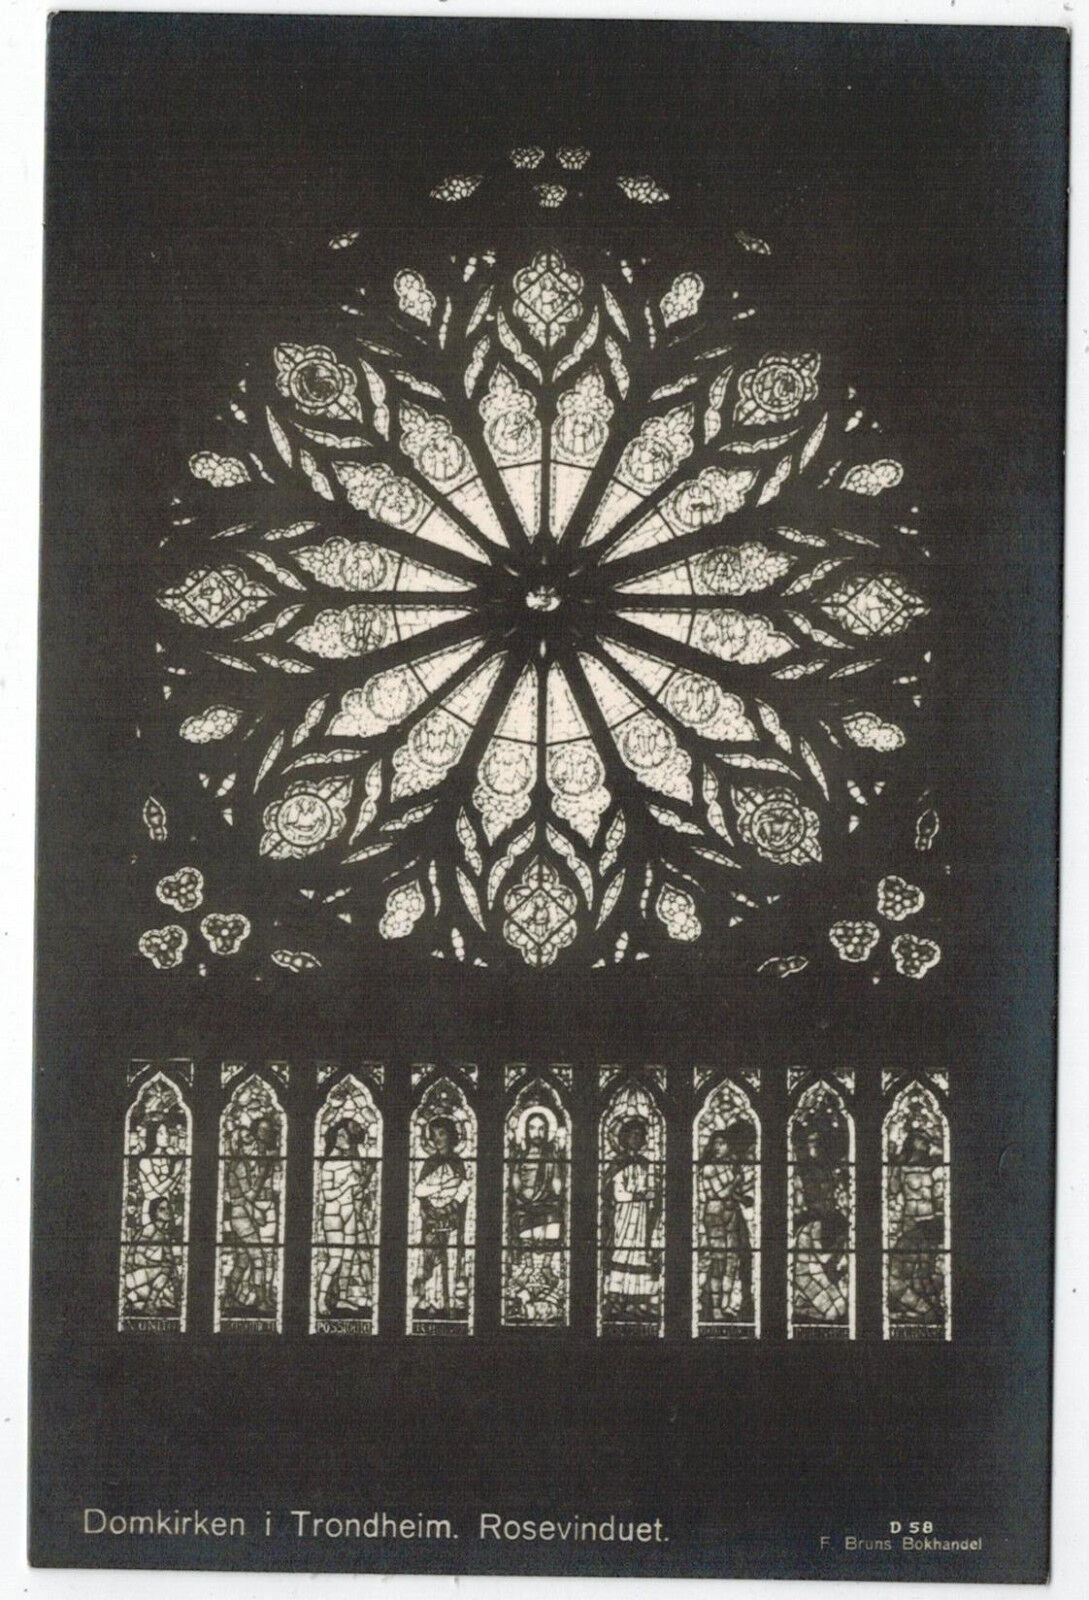 PhC, Interior of Cathedral Church, Rose Windows, Trondhjem, Norway, 1930s